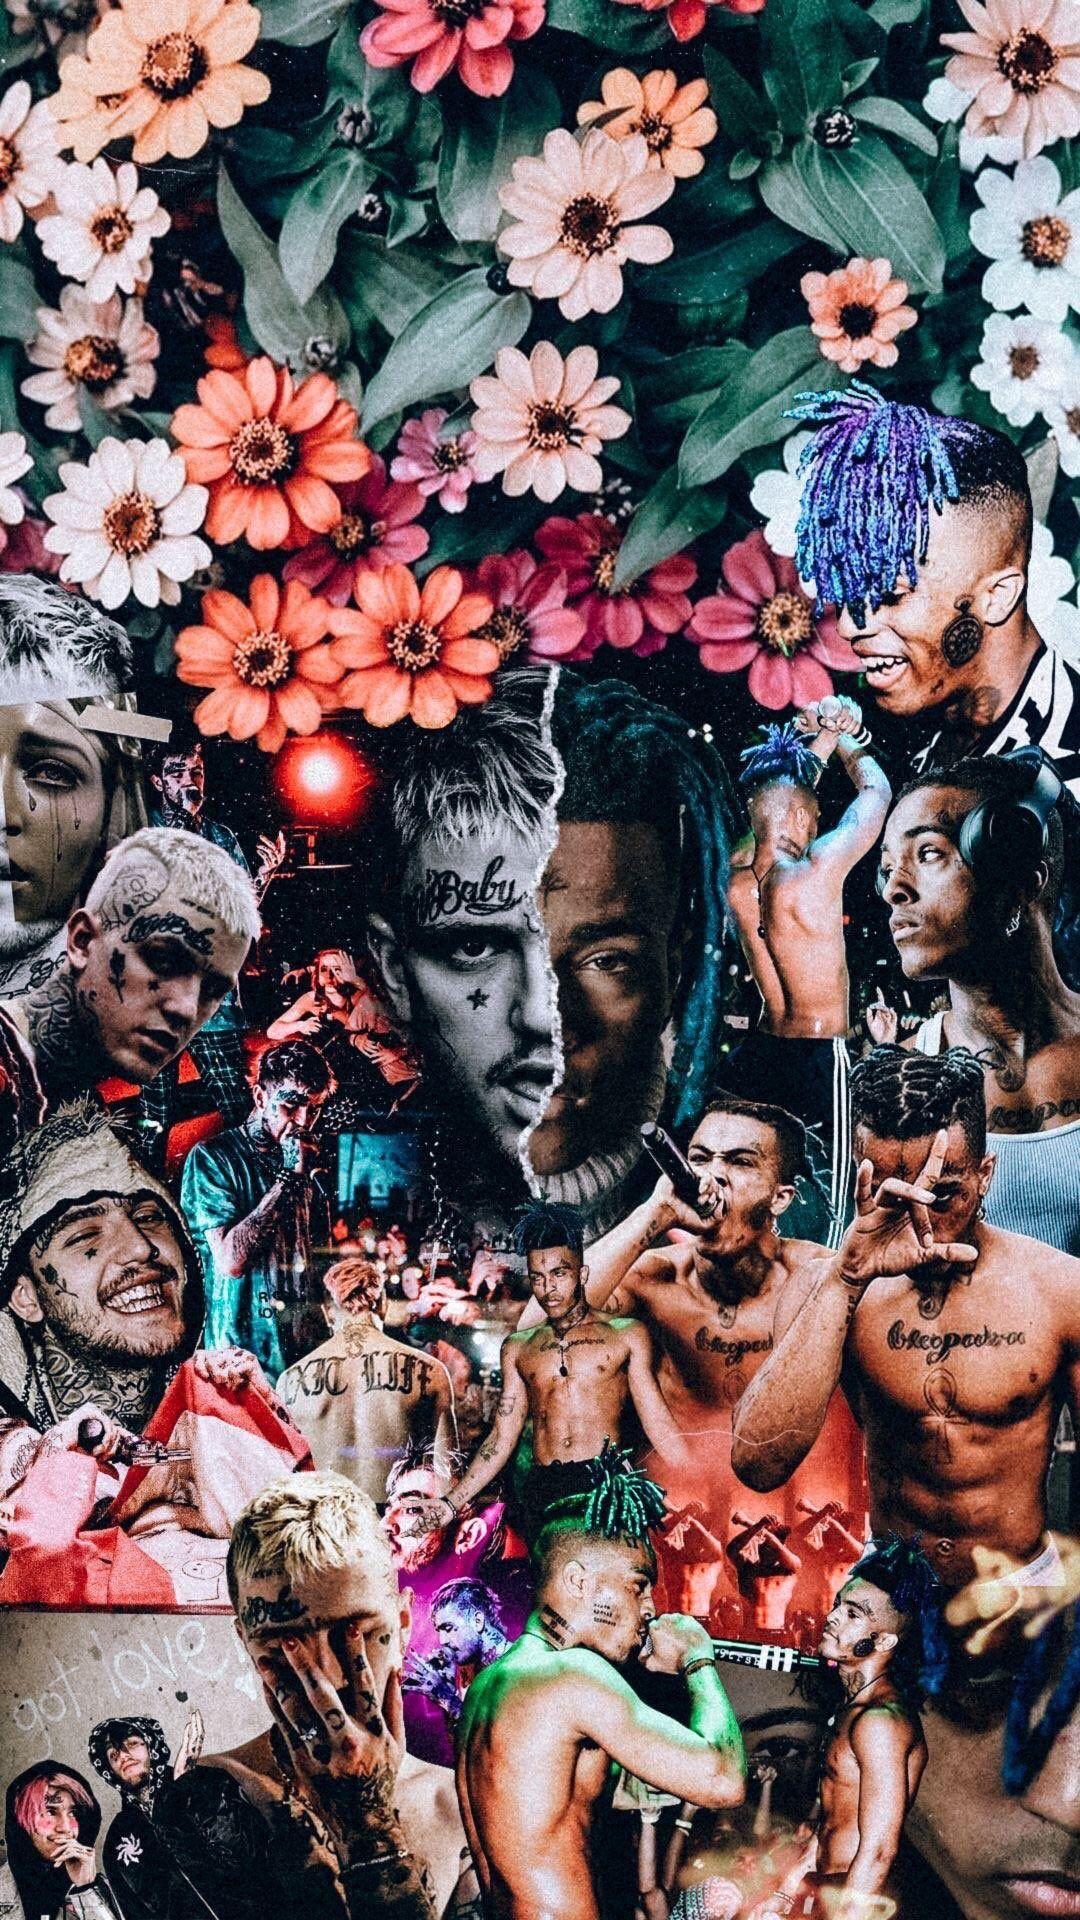 XXXTentacion & Lil Peep Wallpaper From R Lilpeep Had To Share It